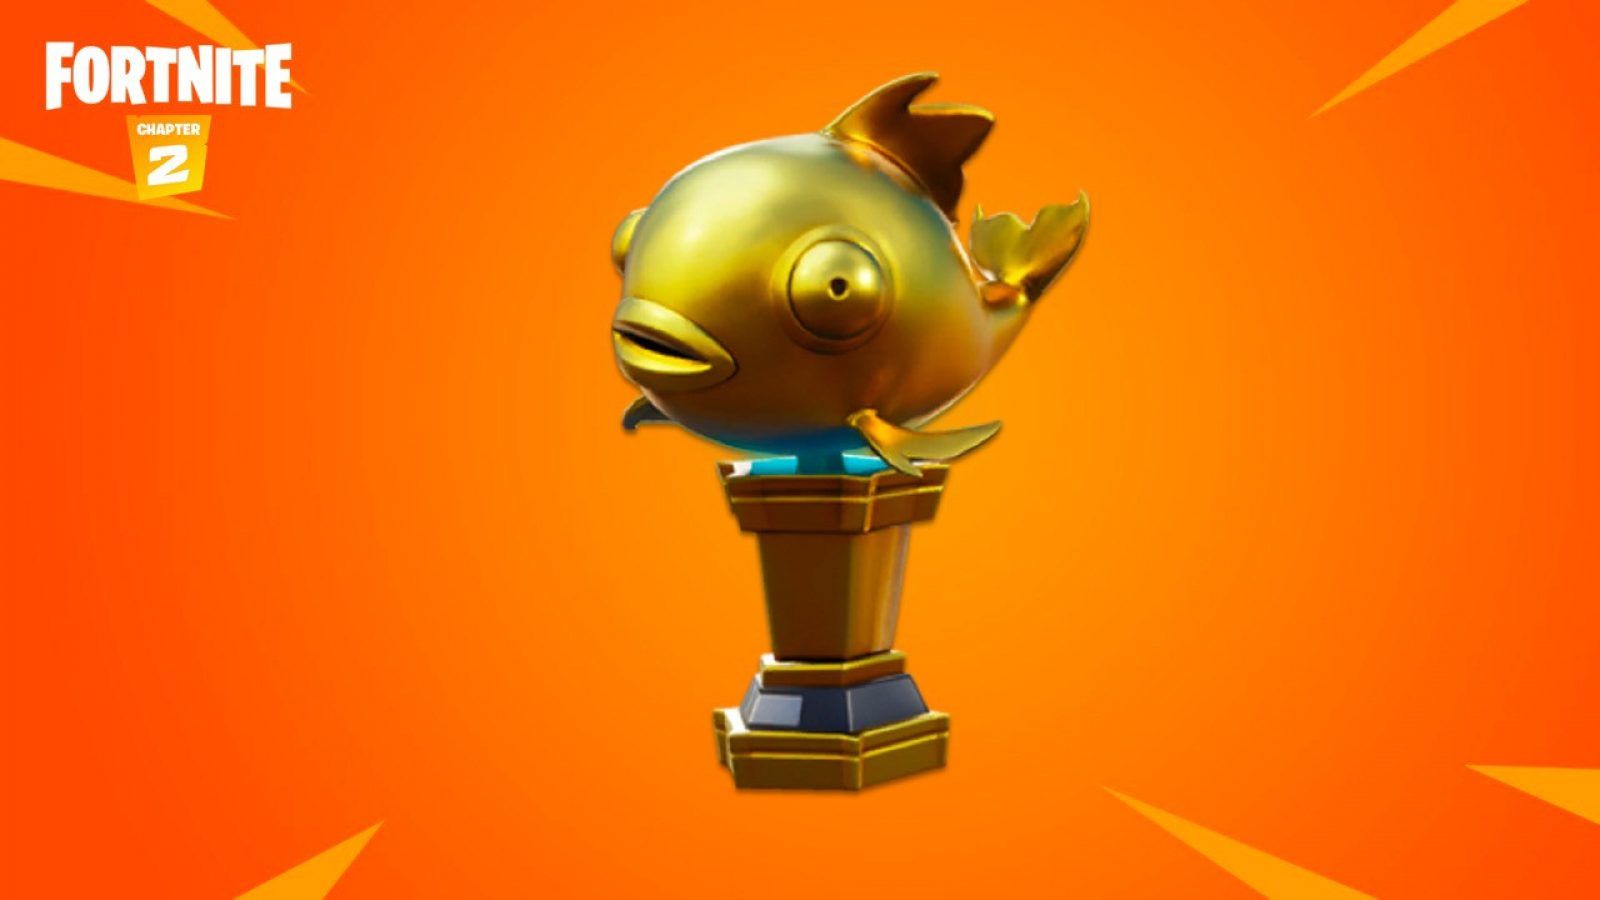 How to catch Fortnite Chapter 2's Mythic Goldfish